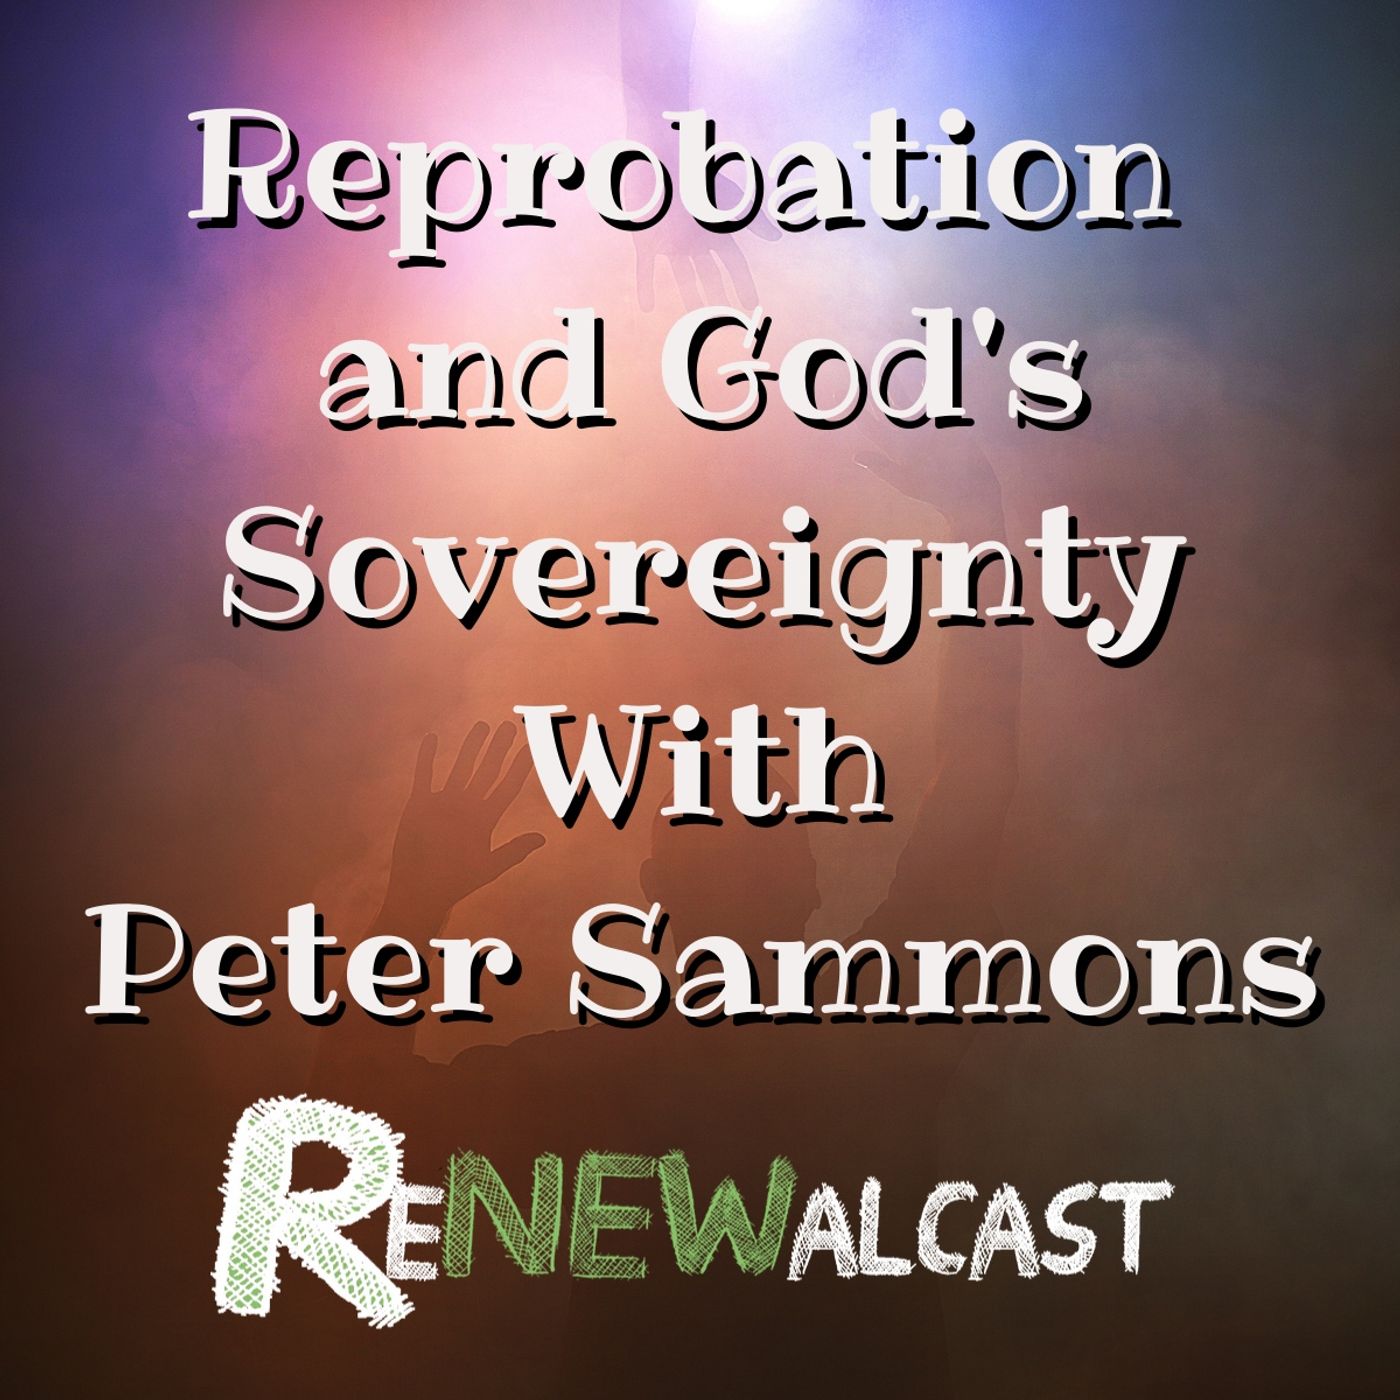 Reprobation and God’s Sovereignty with Peter Sammons